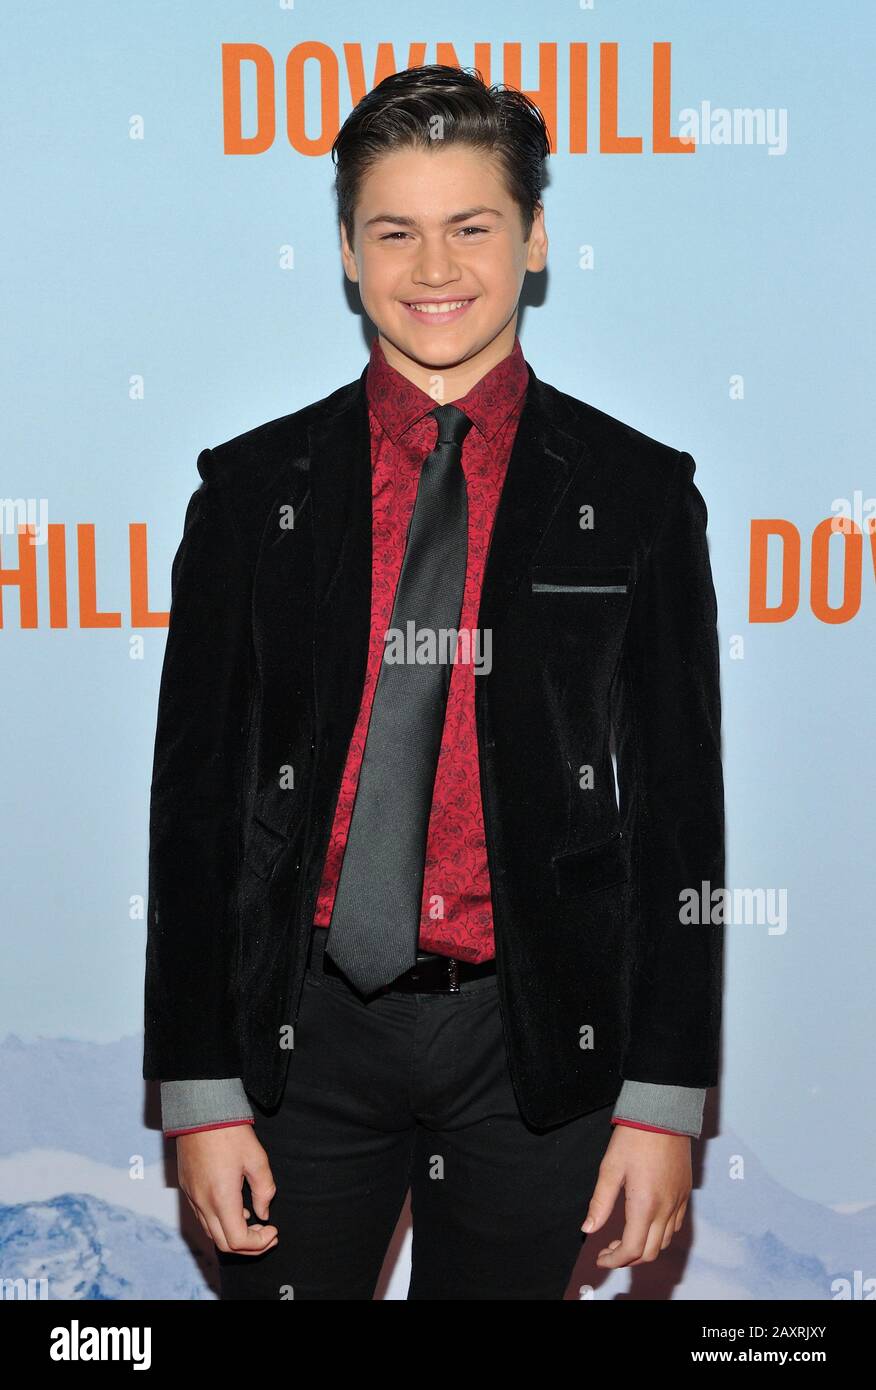 New York, USA. 12th Feb, 2020. Actor Ammon Jacob Ford attends the NY premiere of Downhill at the SVA Theatre in New York, NY on February 12, 2020. (Photo by Stephen Smith/SIPA USA) Credit: Sipa USA/Alamy Live News Stock Photo